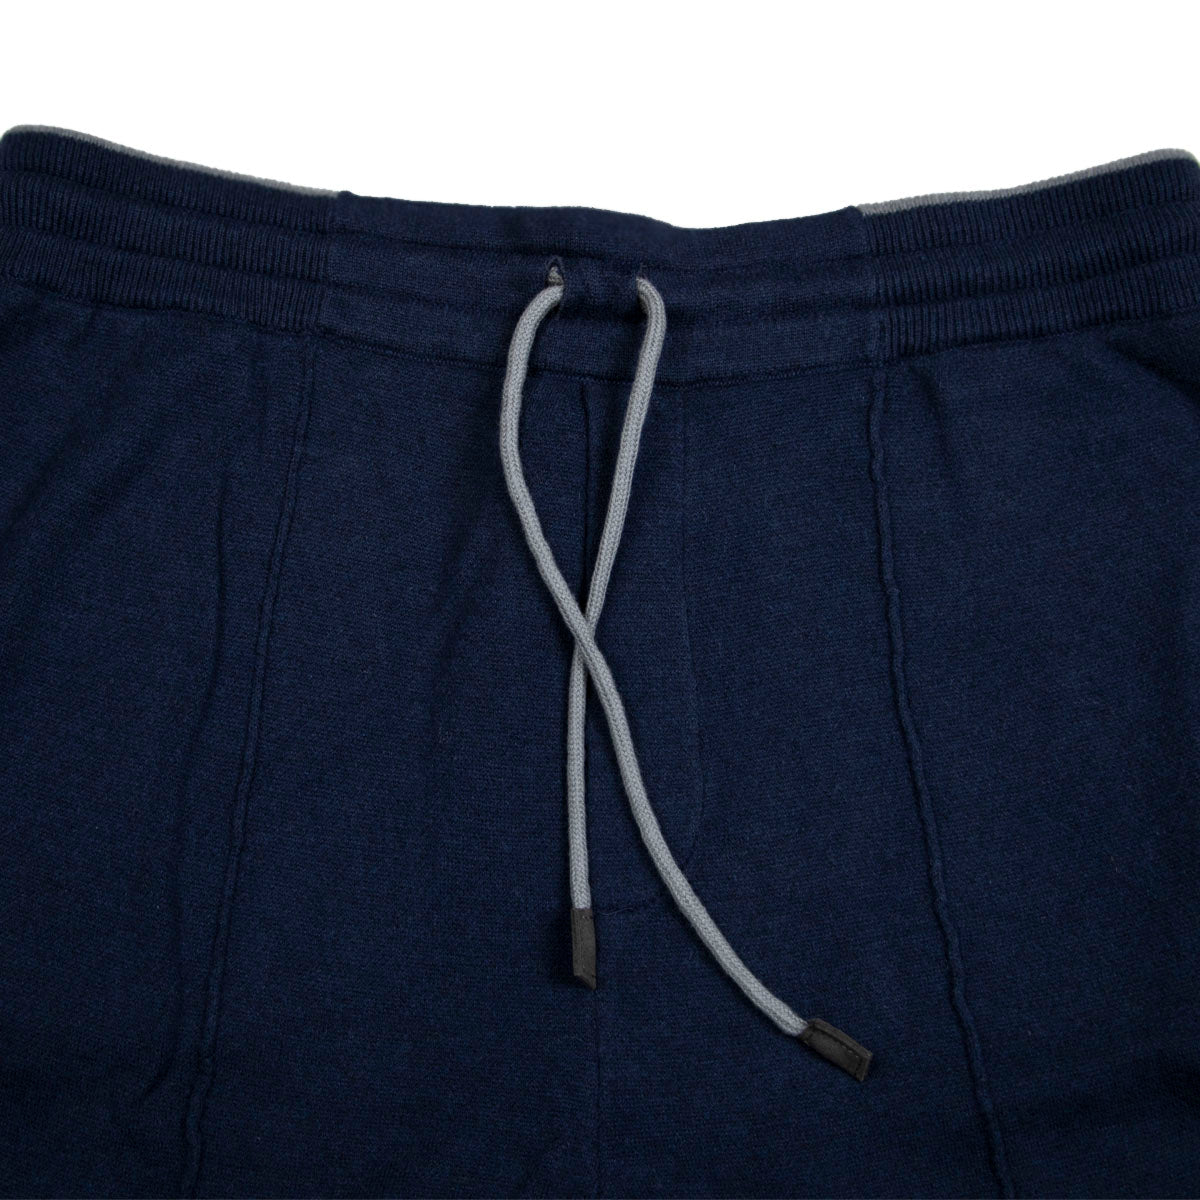 Navy Cotton & Cashmere Contrast Knitted Joggers  Robert Old   